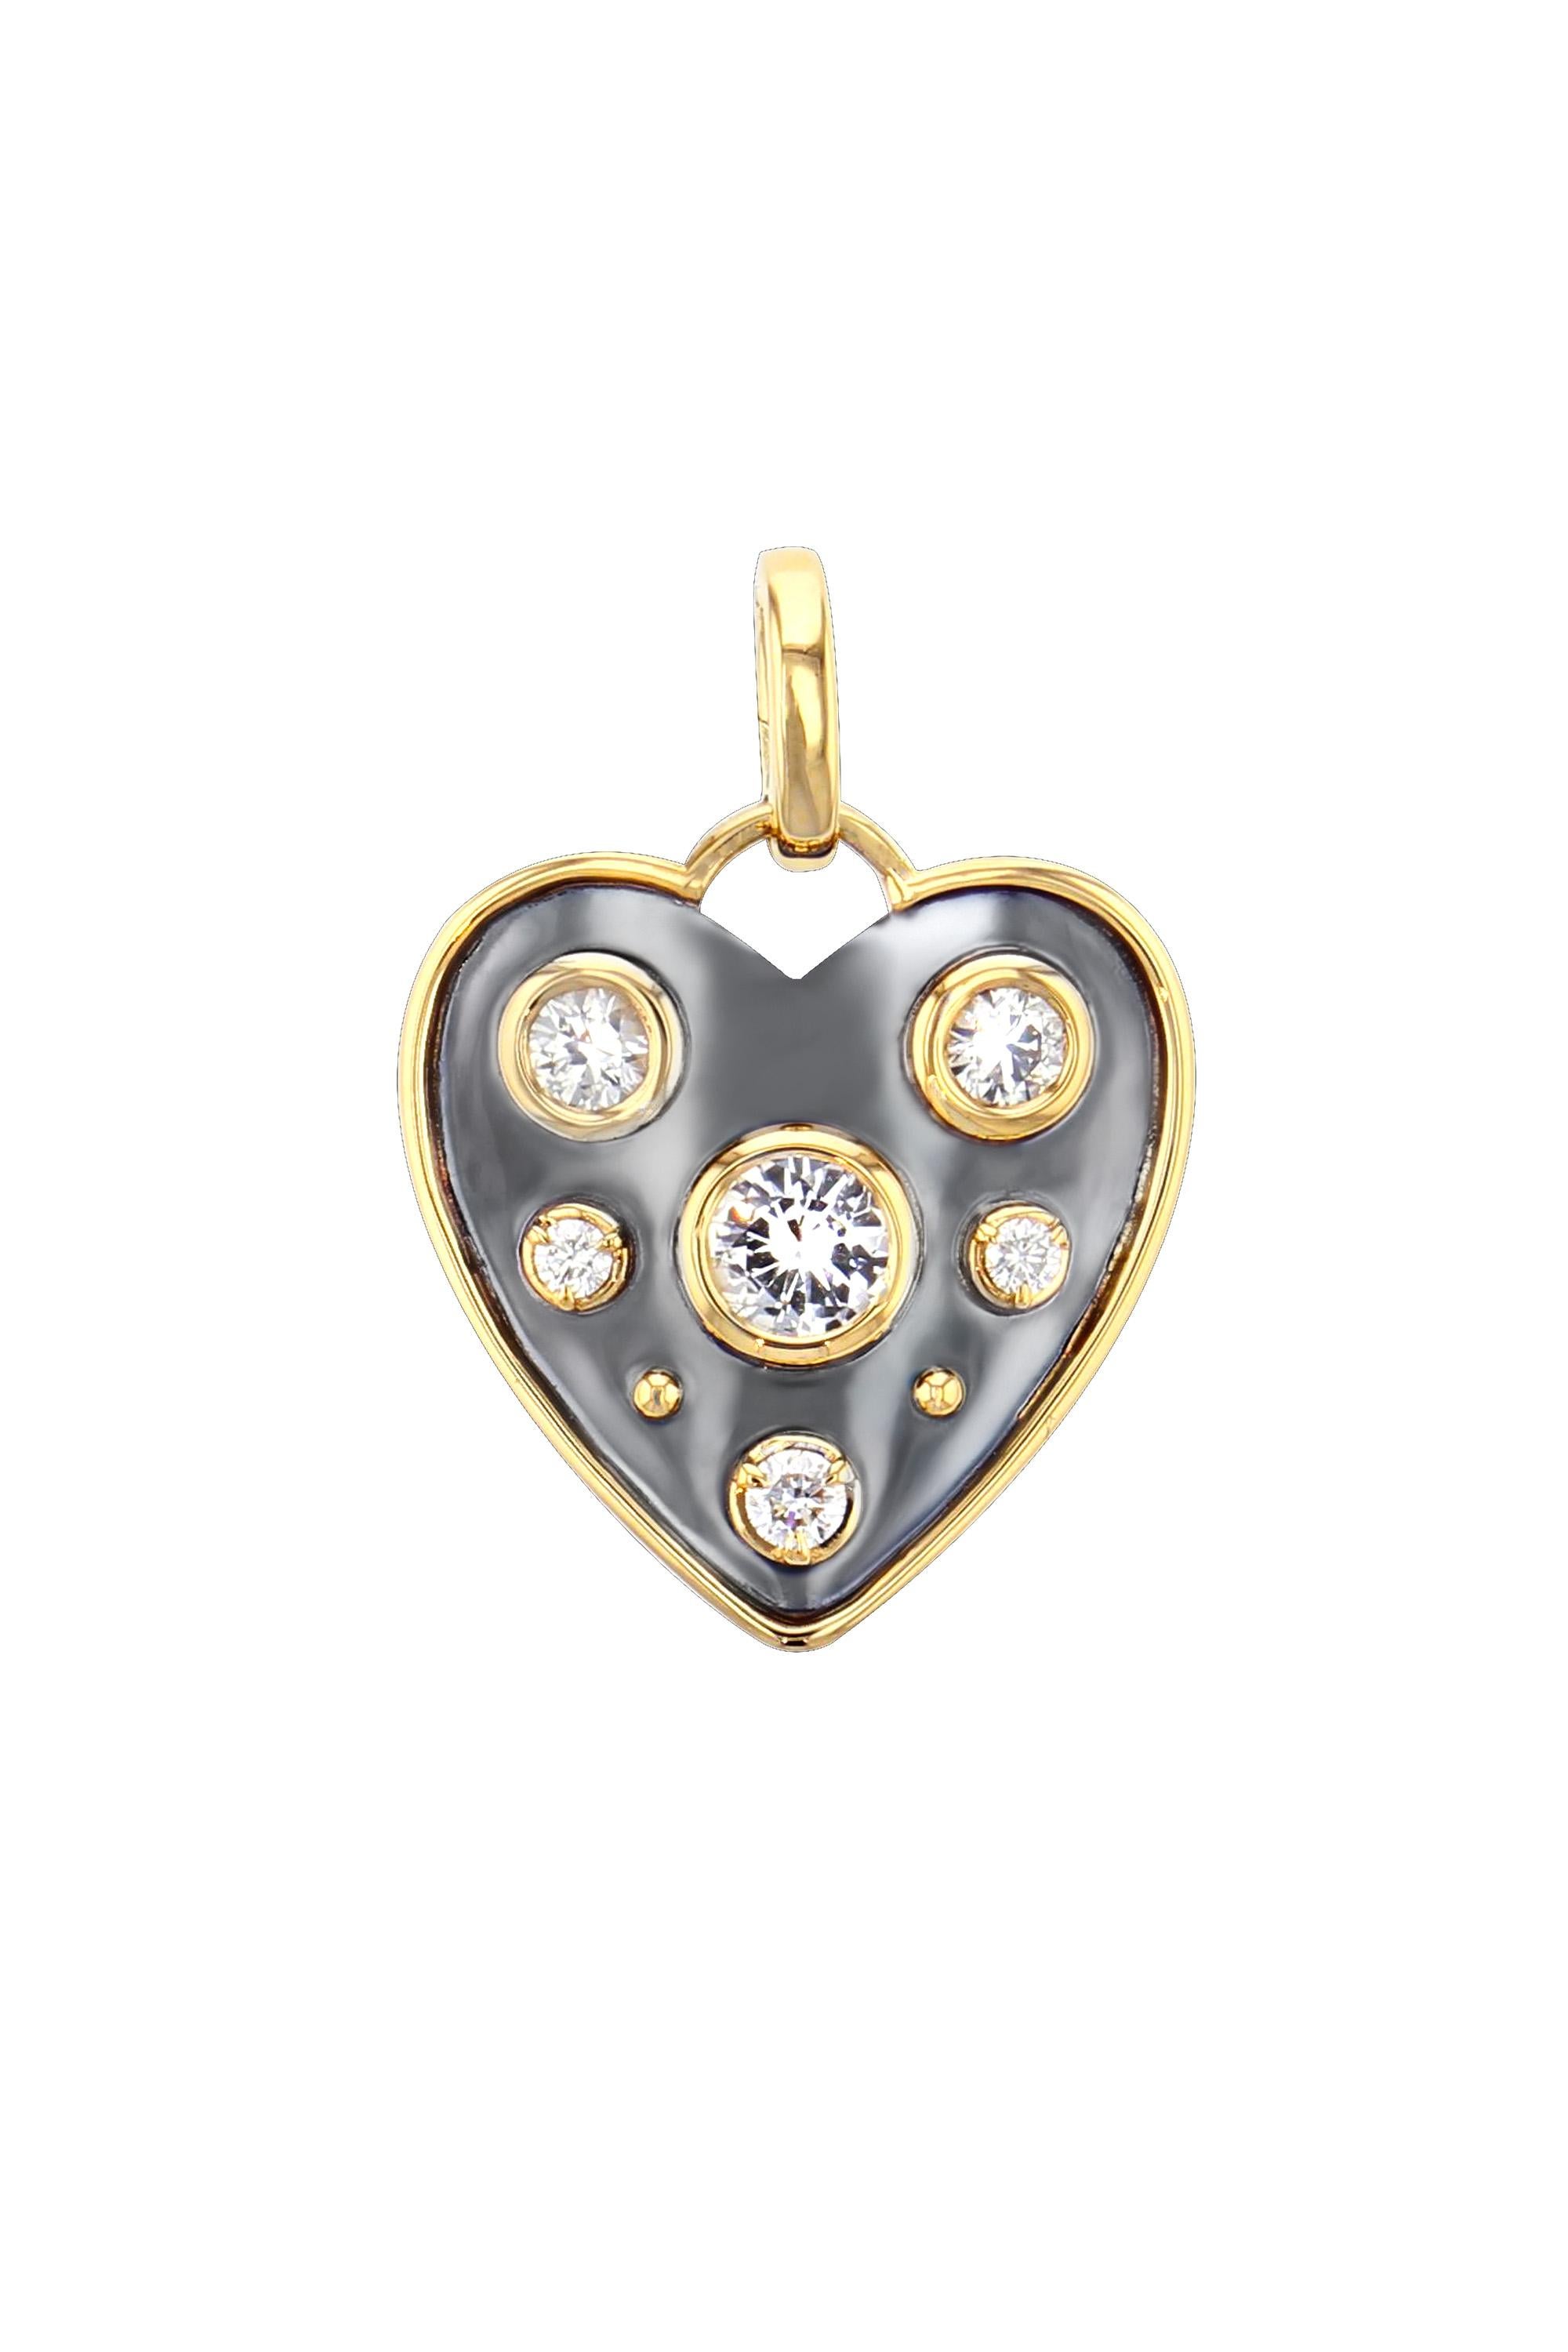 Yellow gold and distressed silver charm studded with a white sapphire in the center and surrounded by diamonds. Openable gold bail.

Sold without the chain. 

Available with chain on request.

Details:
White Sapphire: 0.75 cts
3 Diamonds: 0.12